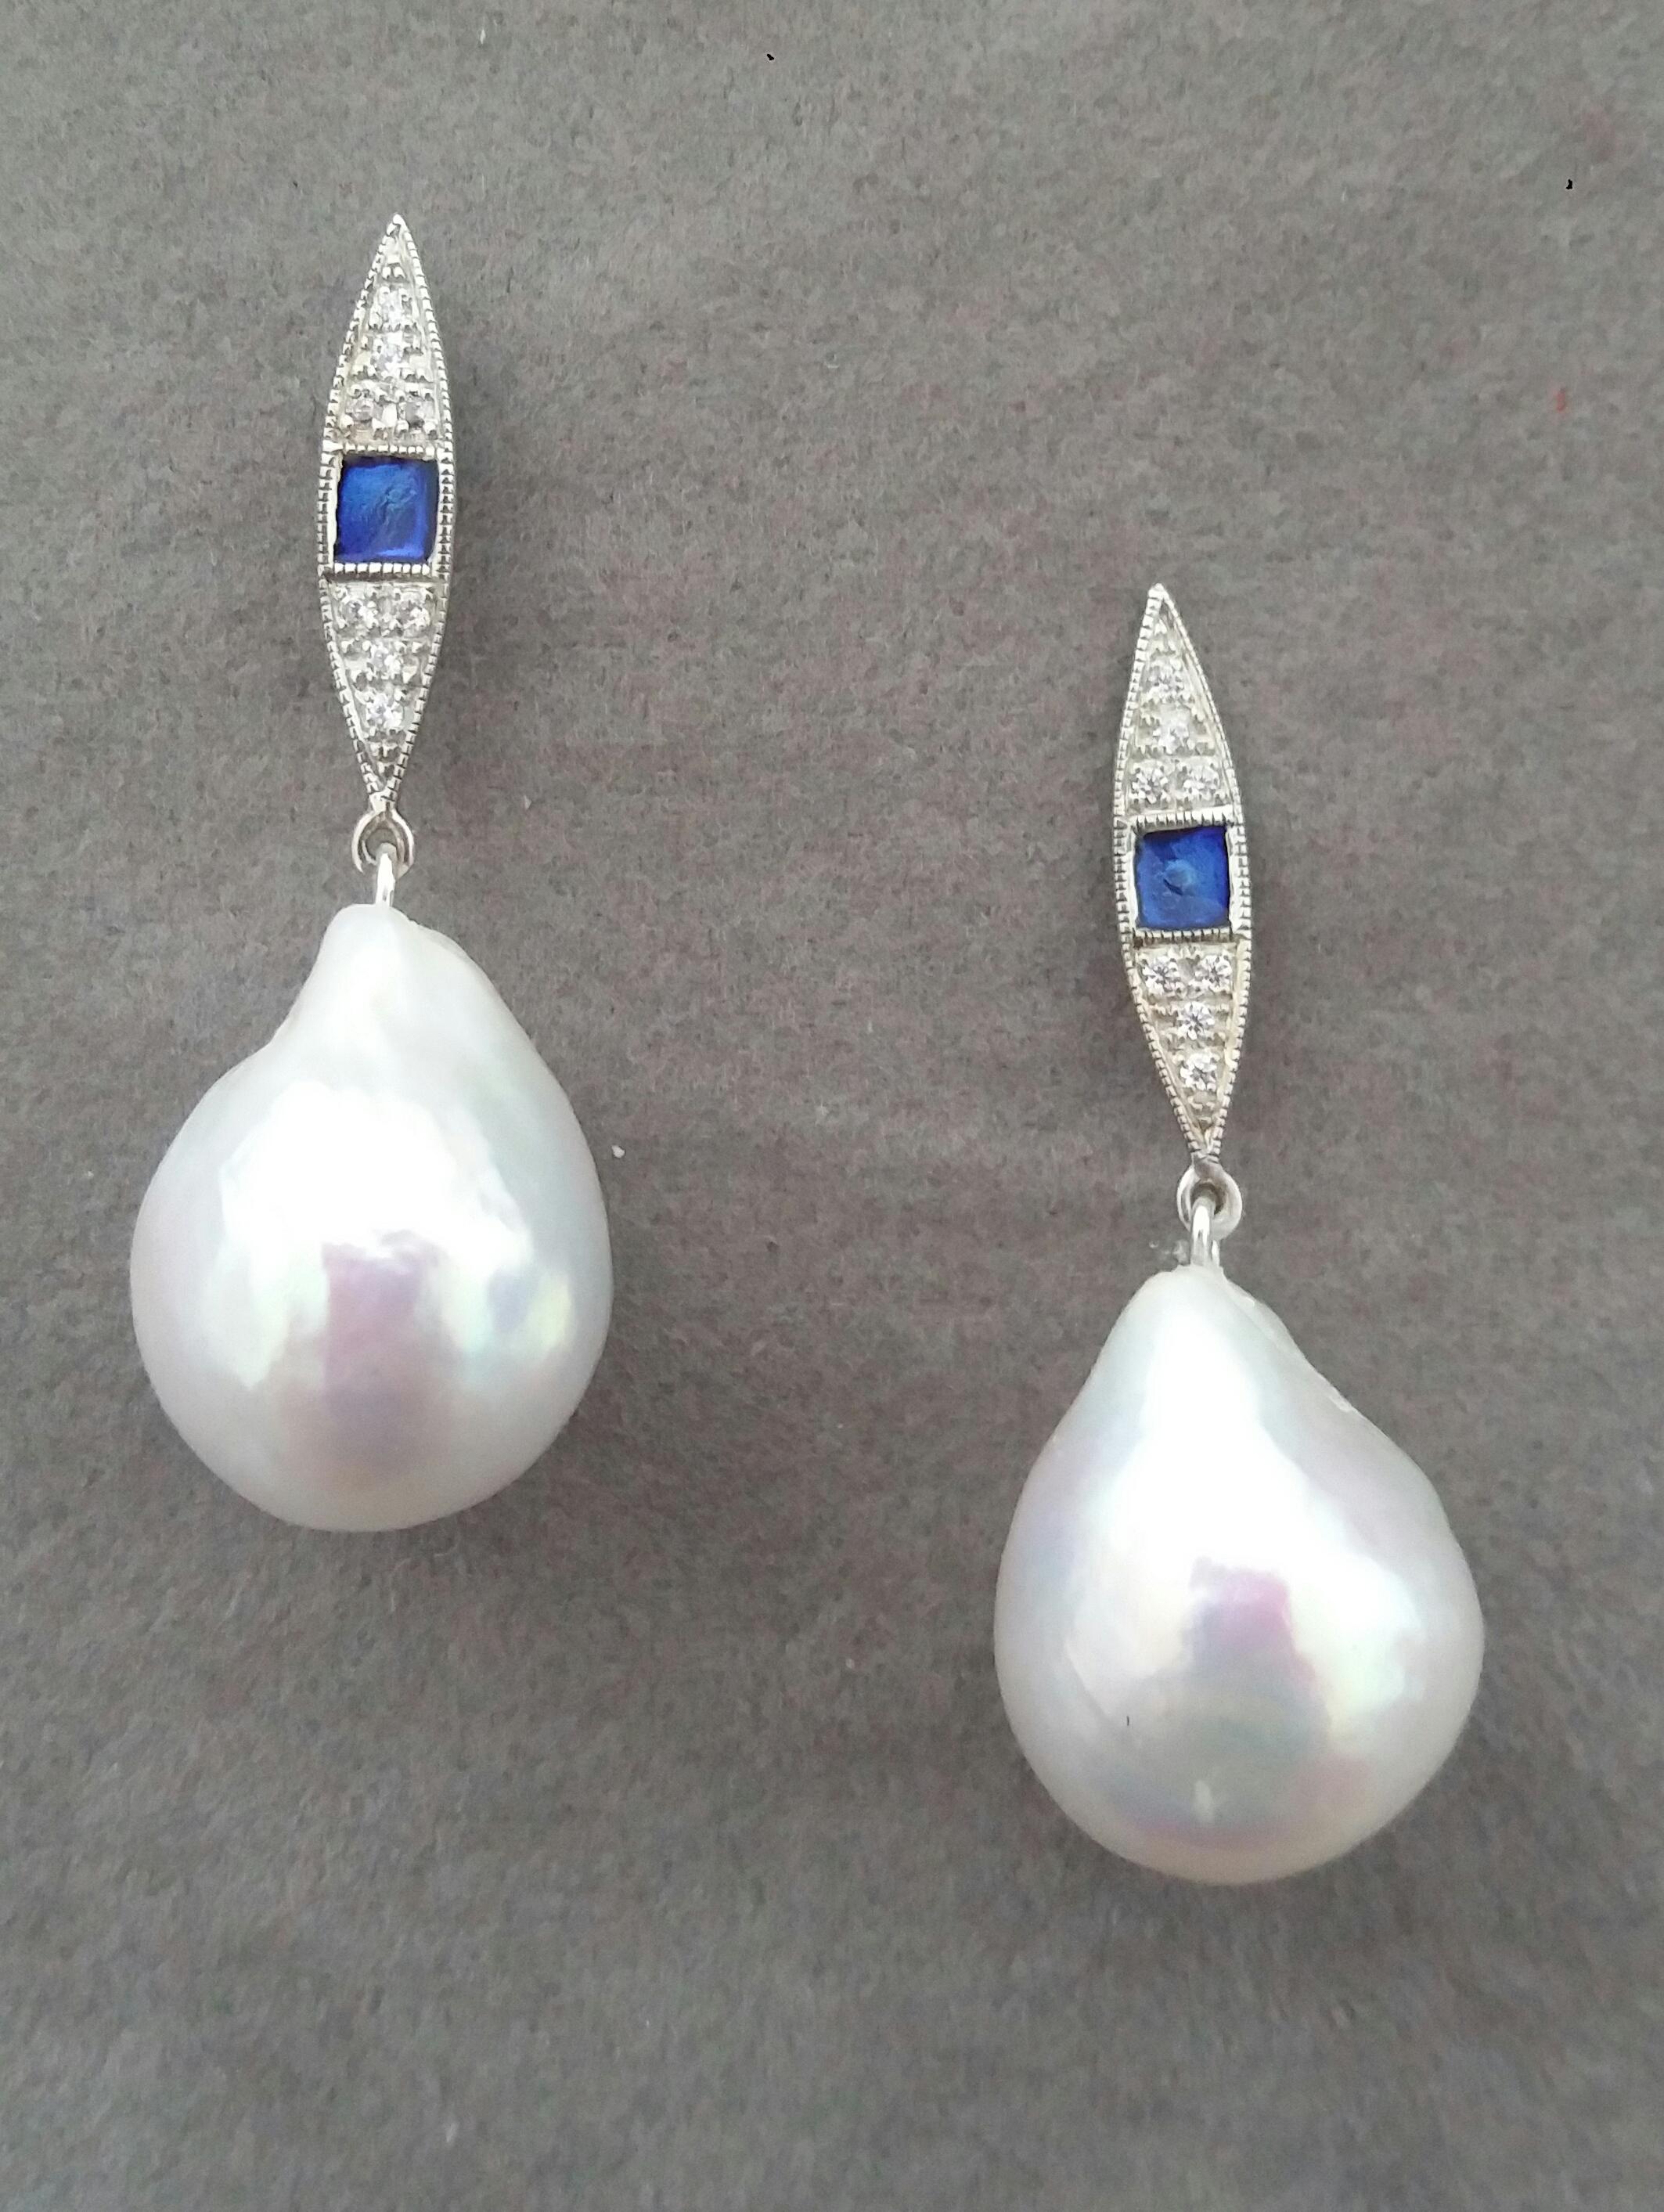 Unique pair of  earrings with on top 2 white gold elements  in a marquise shape with 16 full cut round Diamonds and Blue Enamel. In the bottom parts we have 2 White  Color Pear Shape Baroque Pearls measuring 14x 18 mm. and weighing 41 carats.

In